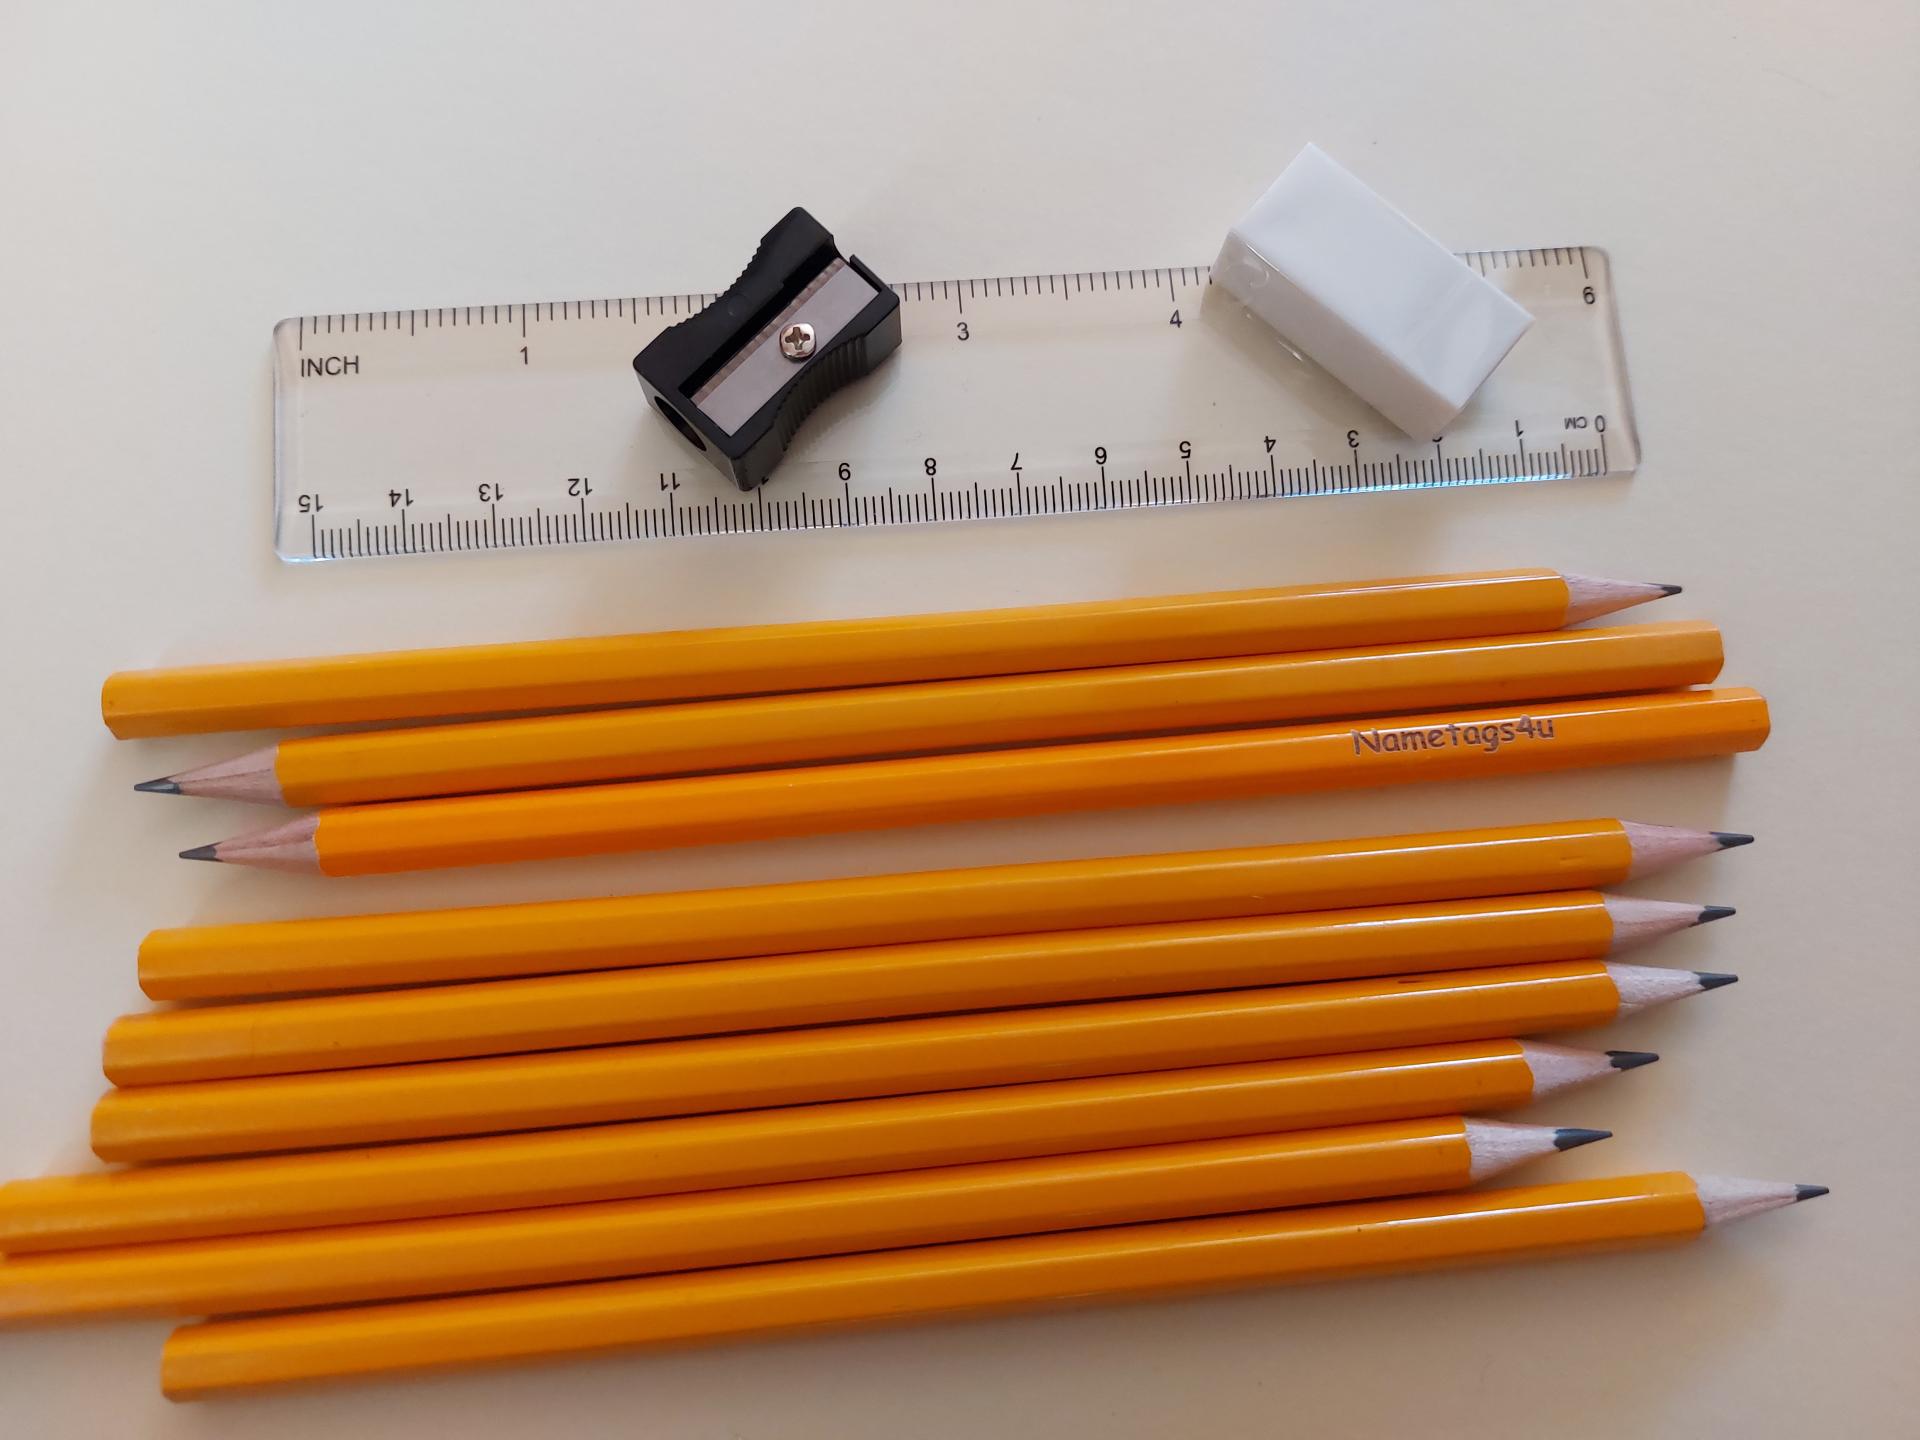 8 Engraved Writing pencils with Rubber, Ruler & Sharpener